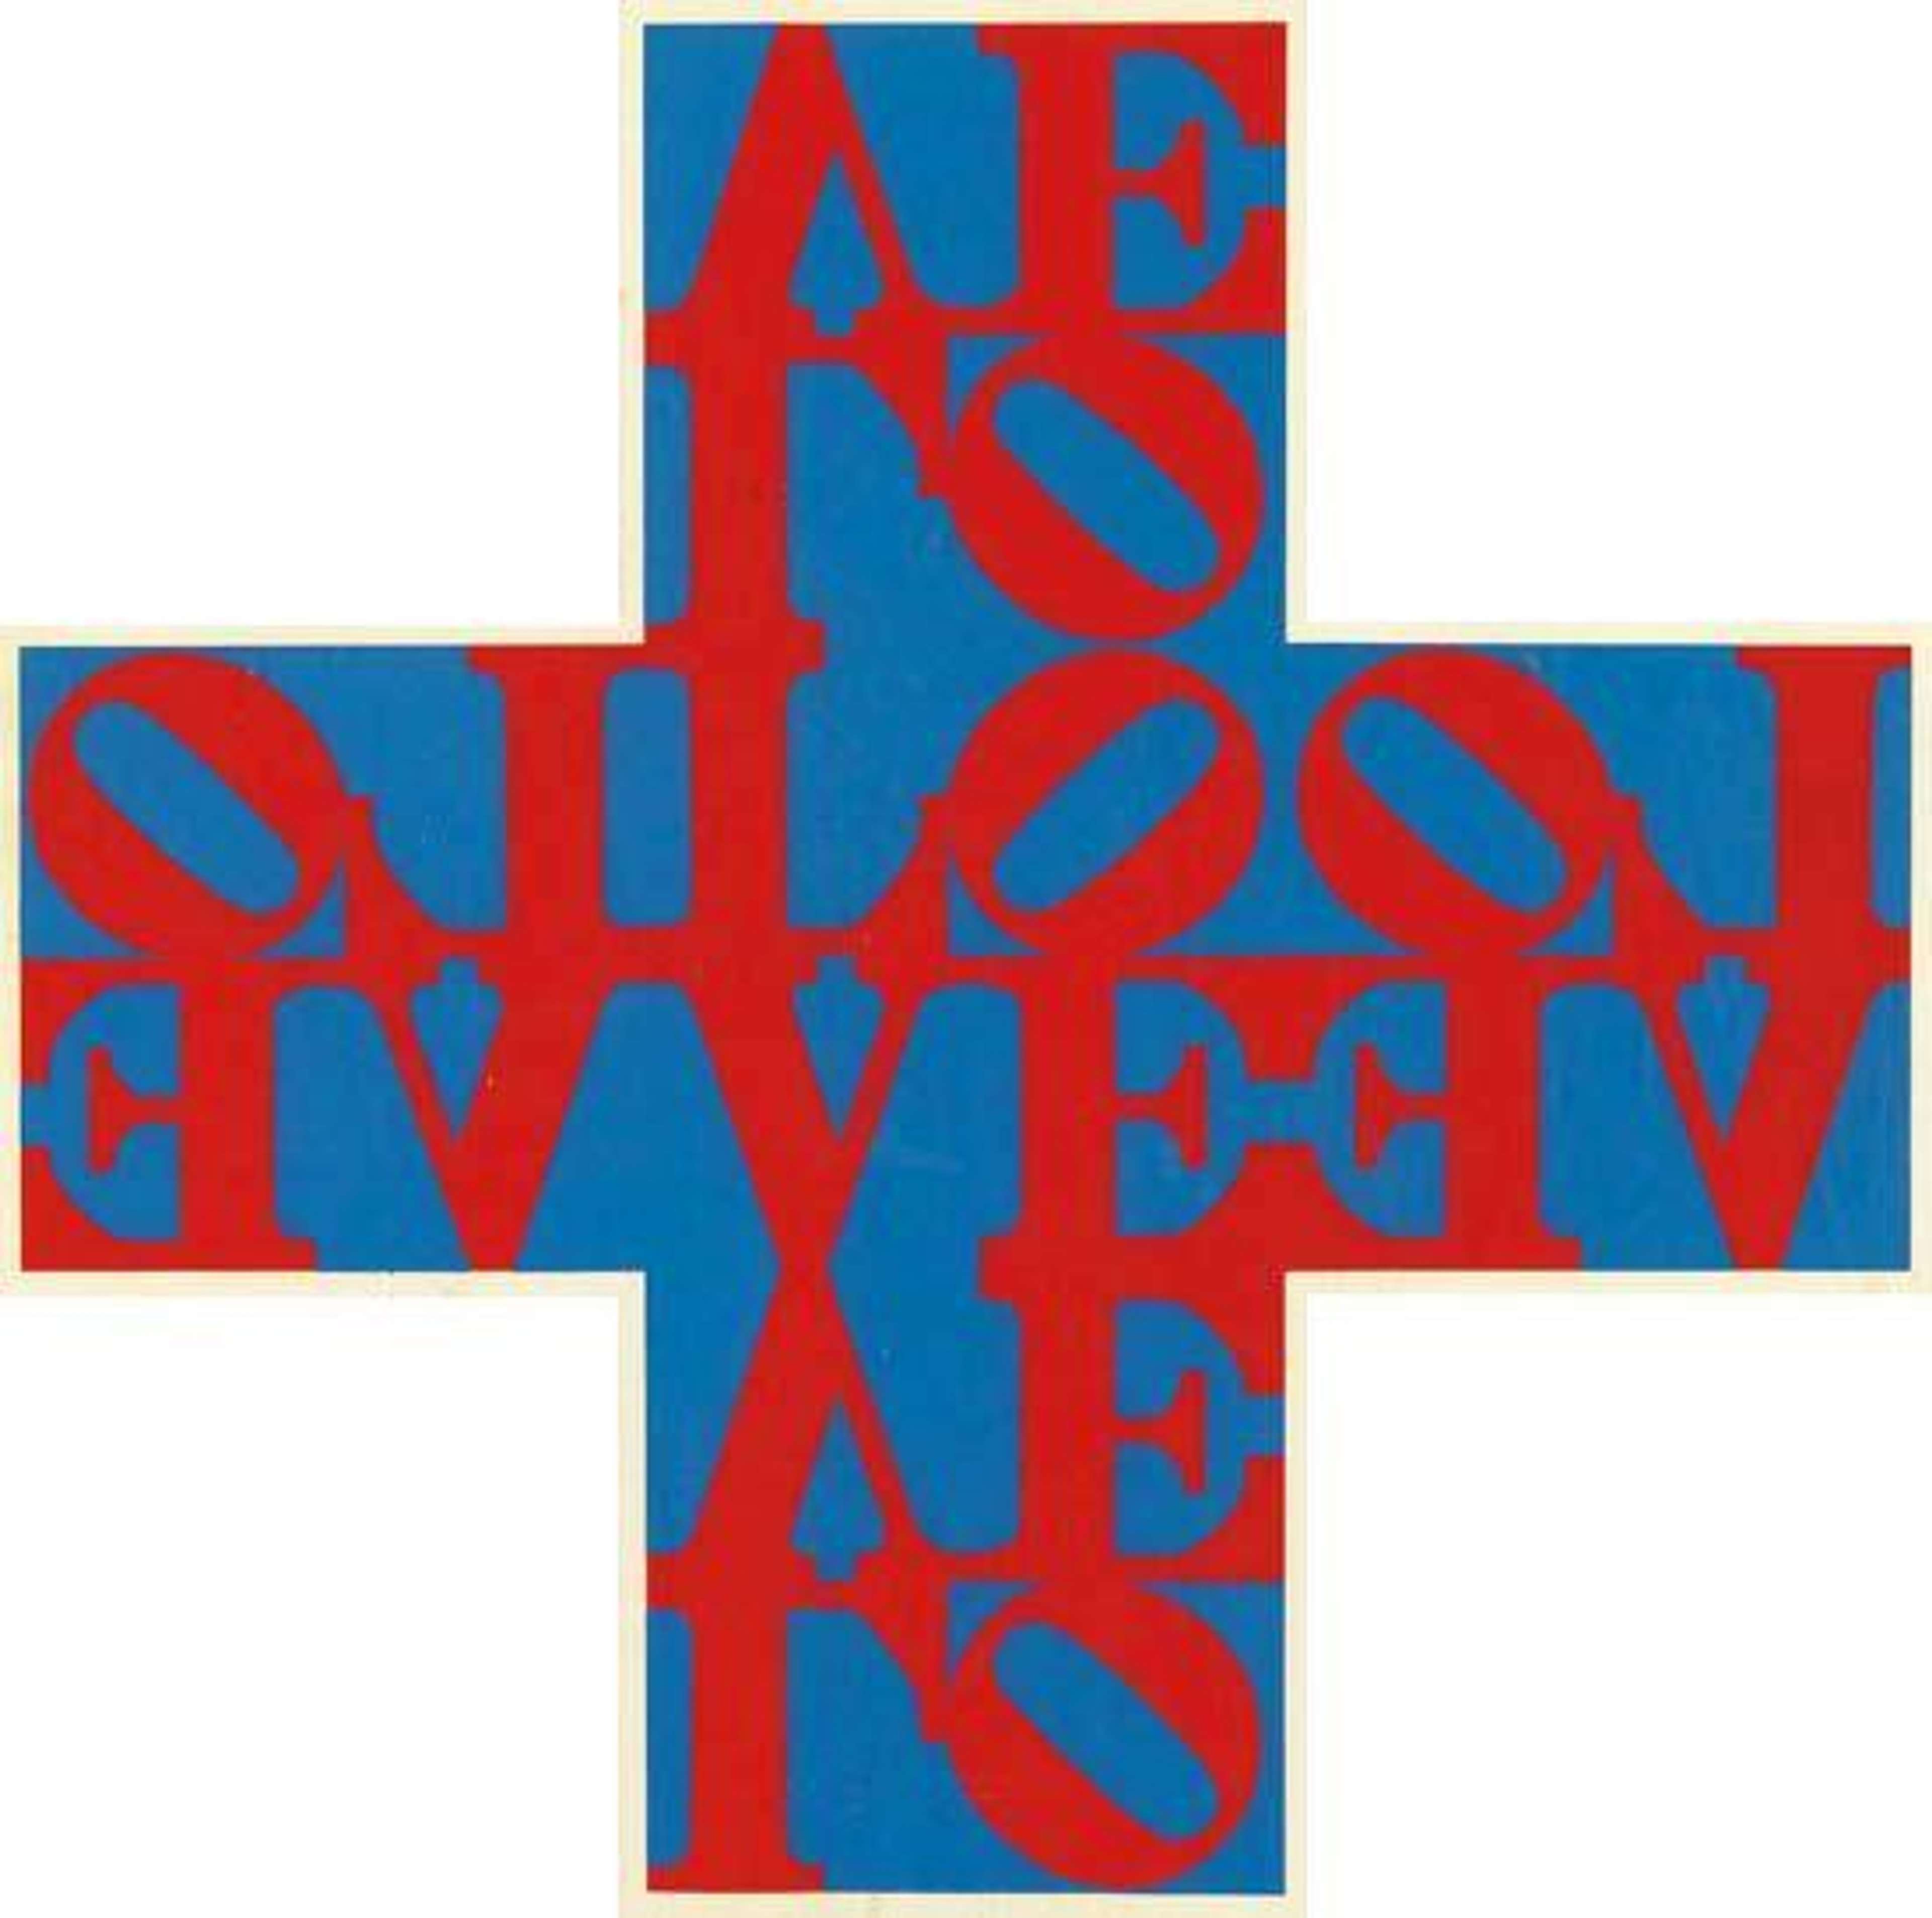 Love Cross (red and blue) - Signed Print by Robert Indiana 1968 - MyArtBroker